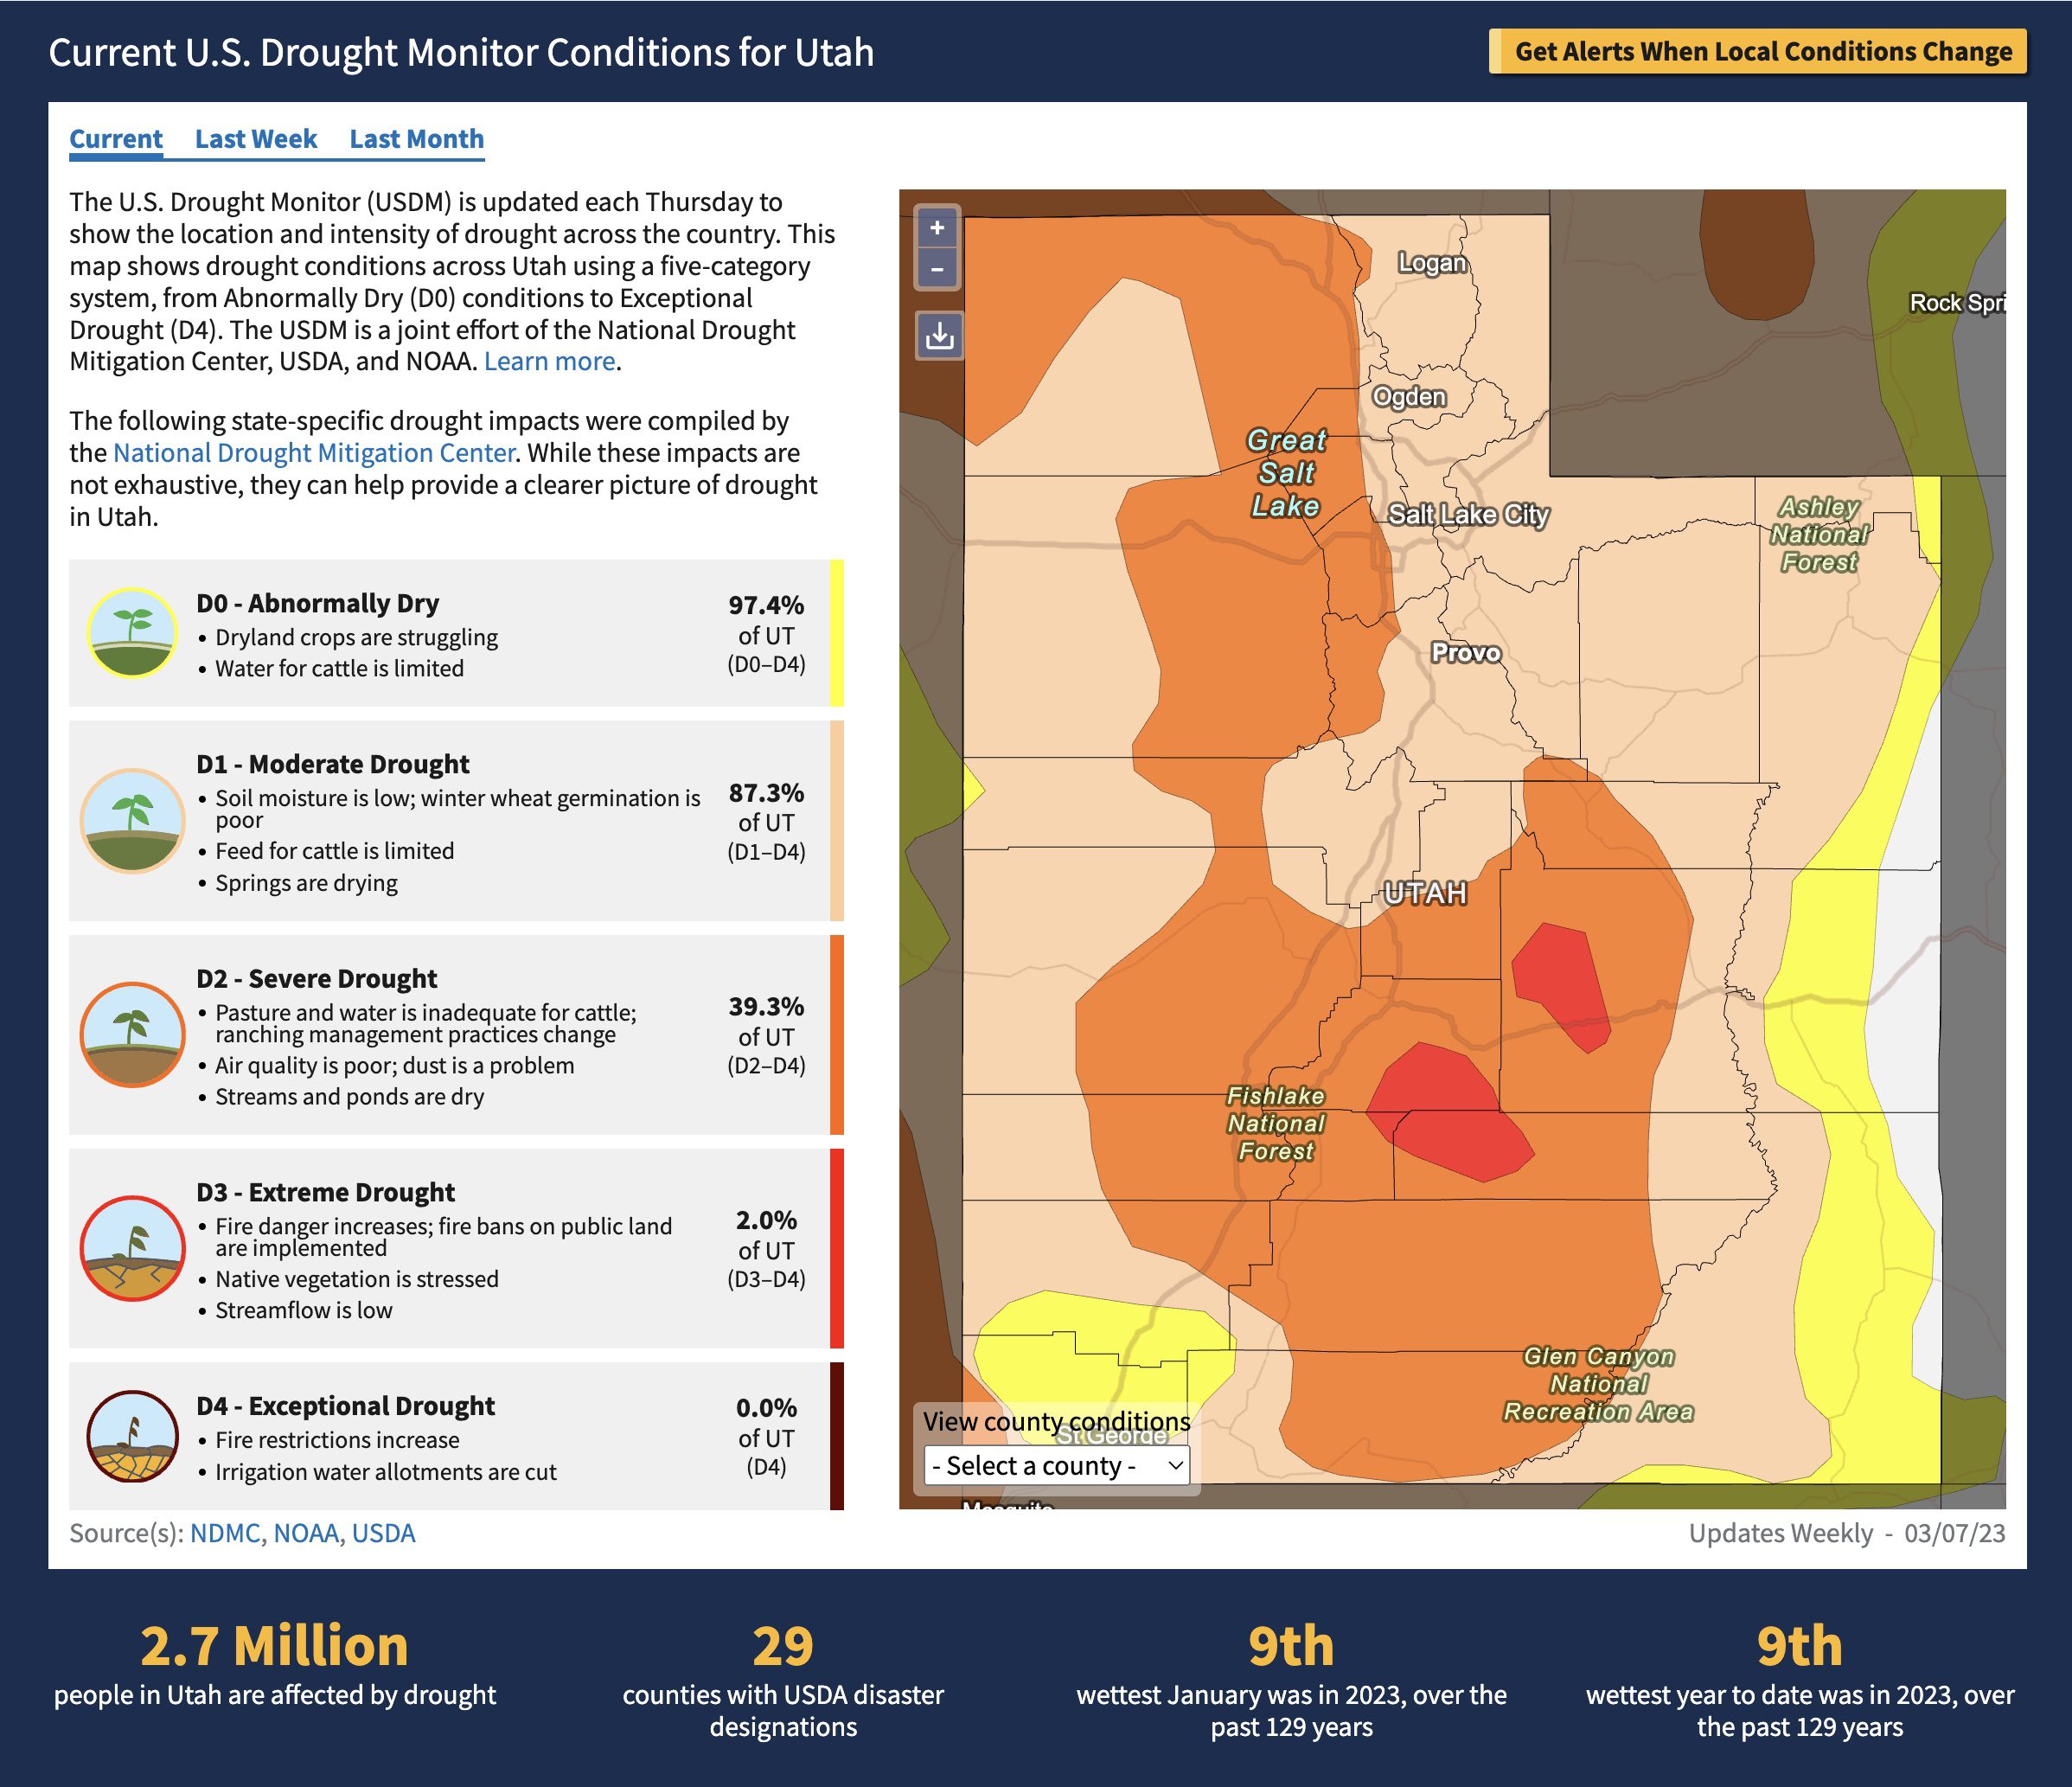 Drought conditions across Utah as of May 7, 2023.